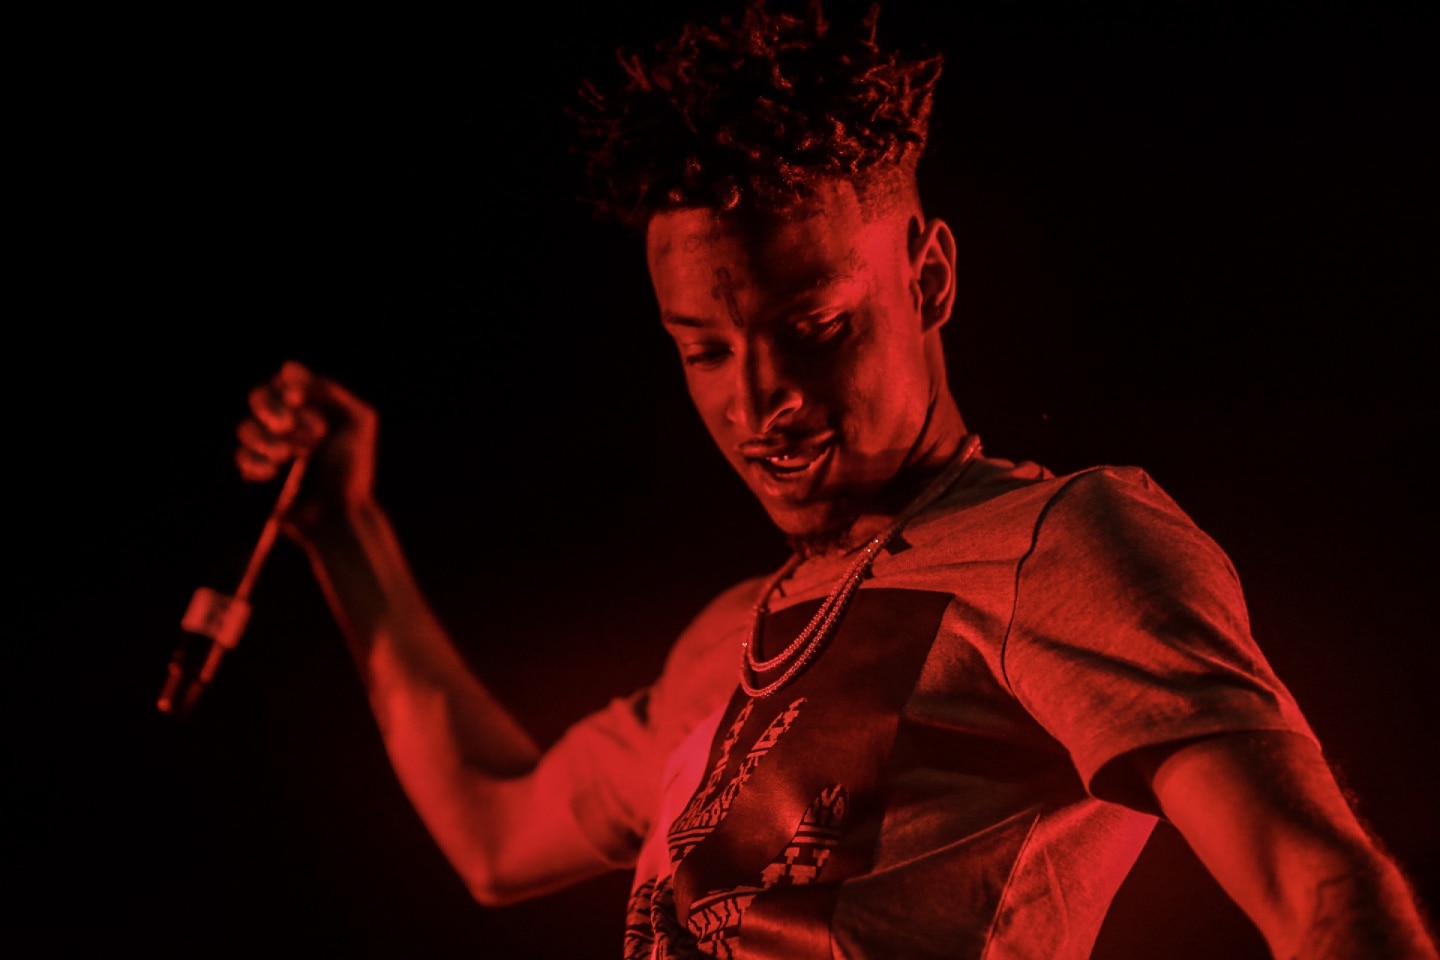 What It’s Like To Be On Tour With 21 Savage And Young Thug